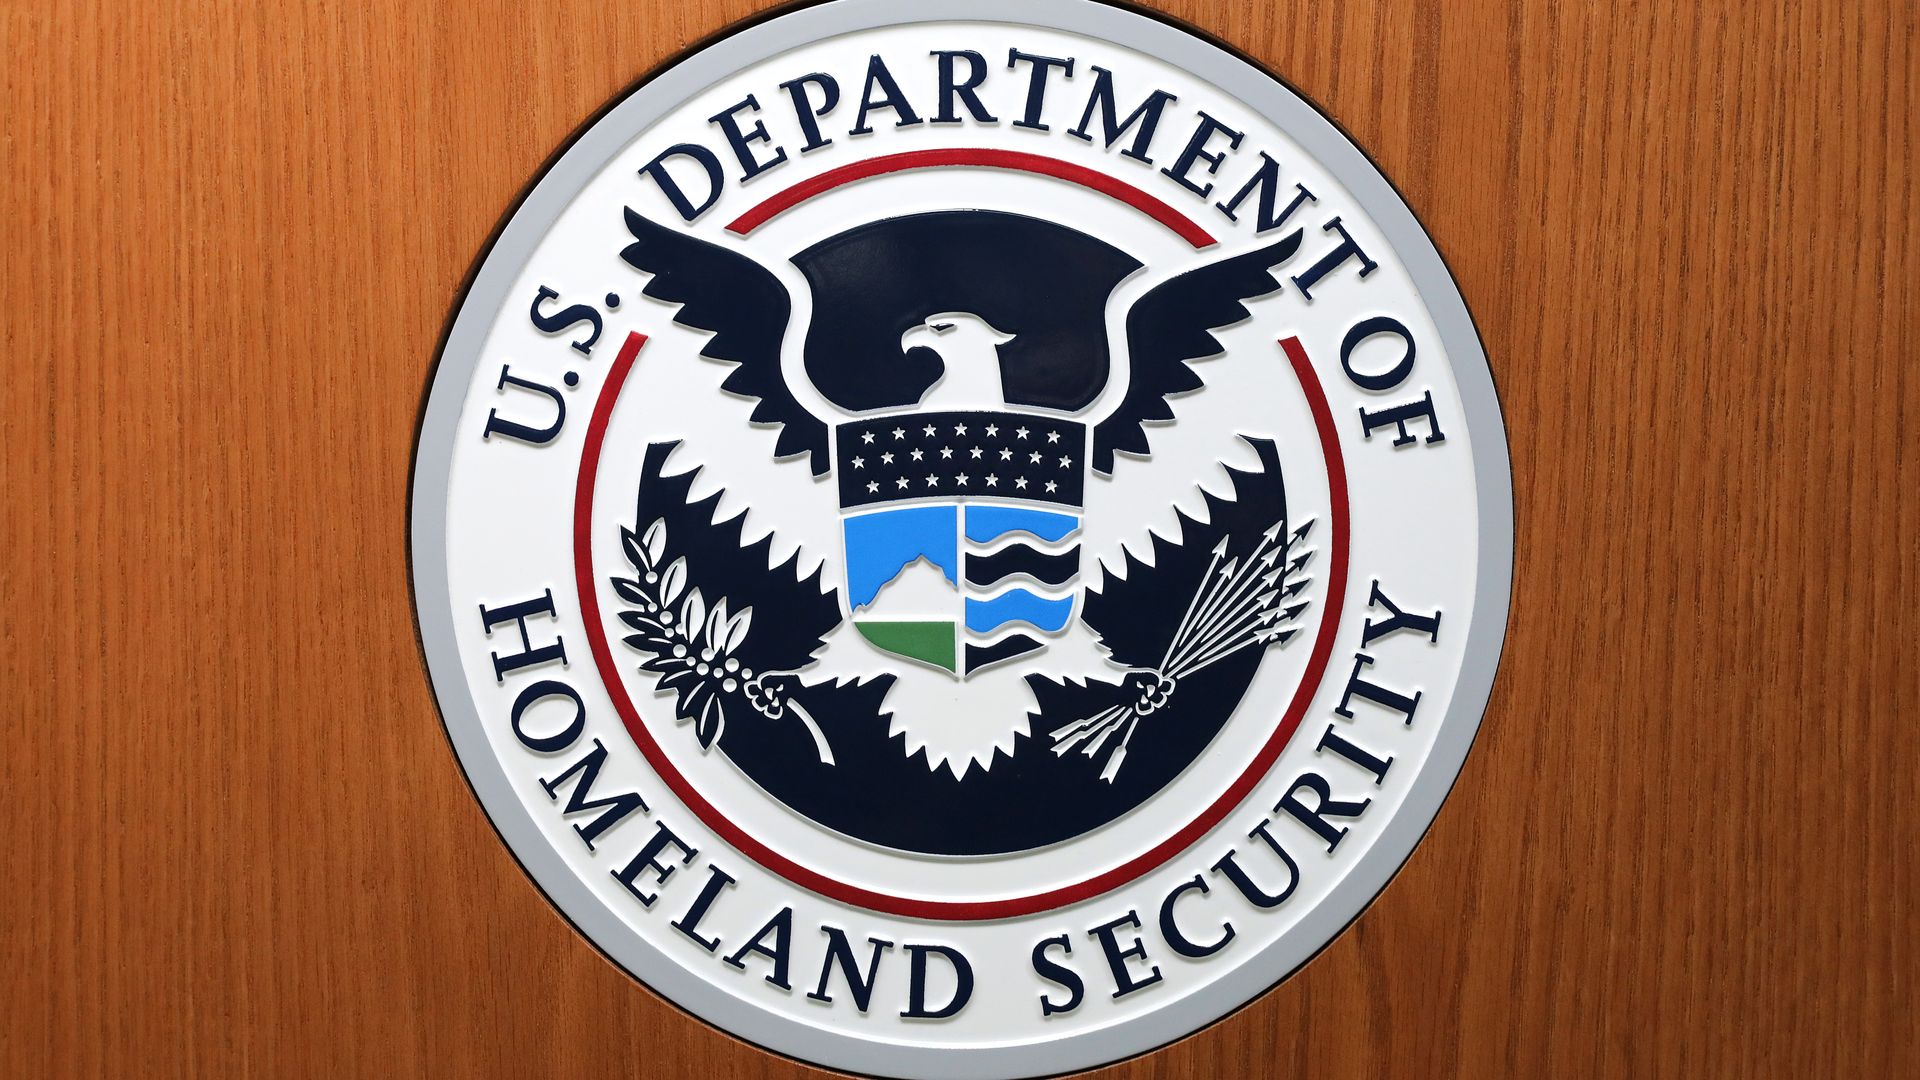 The Department of Homeland Security seal.